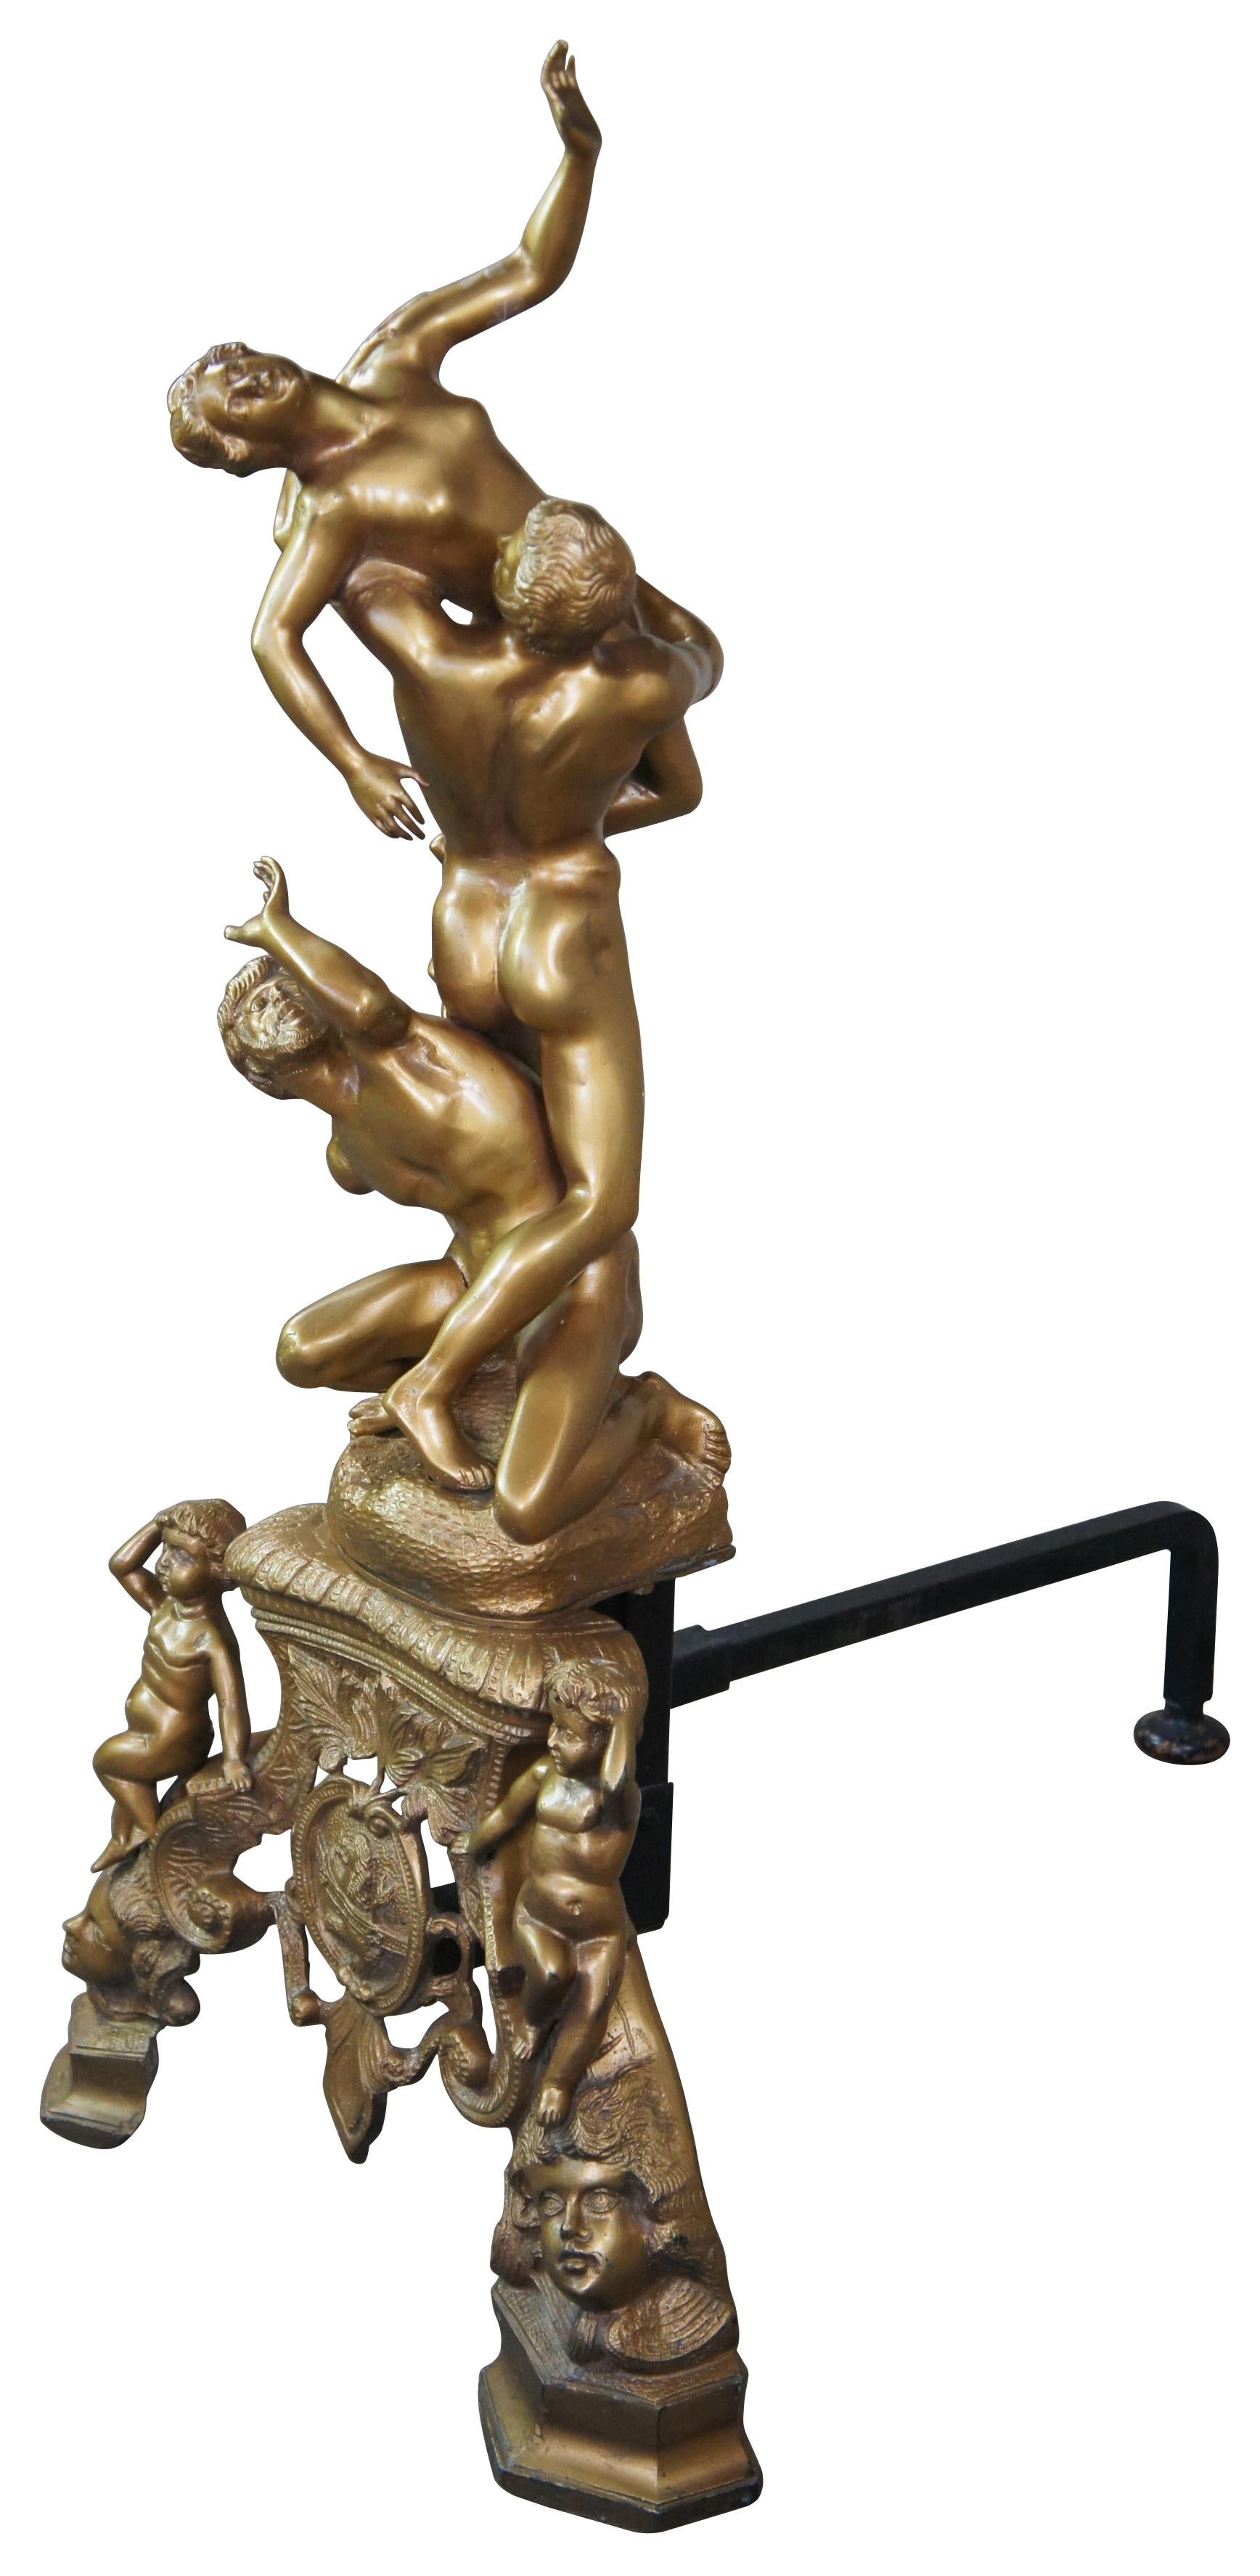 2 Monumental Renaissance Revival Sculptural Bronze Andirons After Giambologna In Good Condition For Sale In Dayton, OH